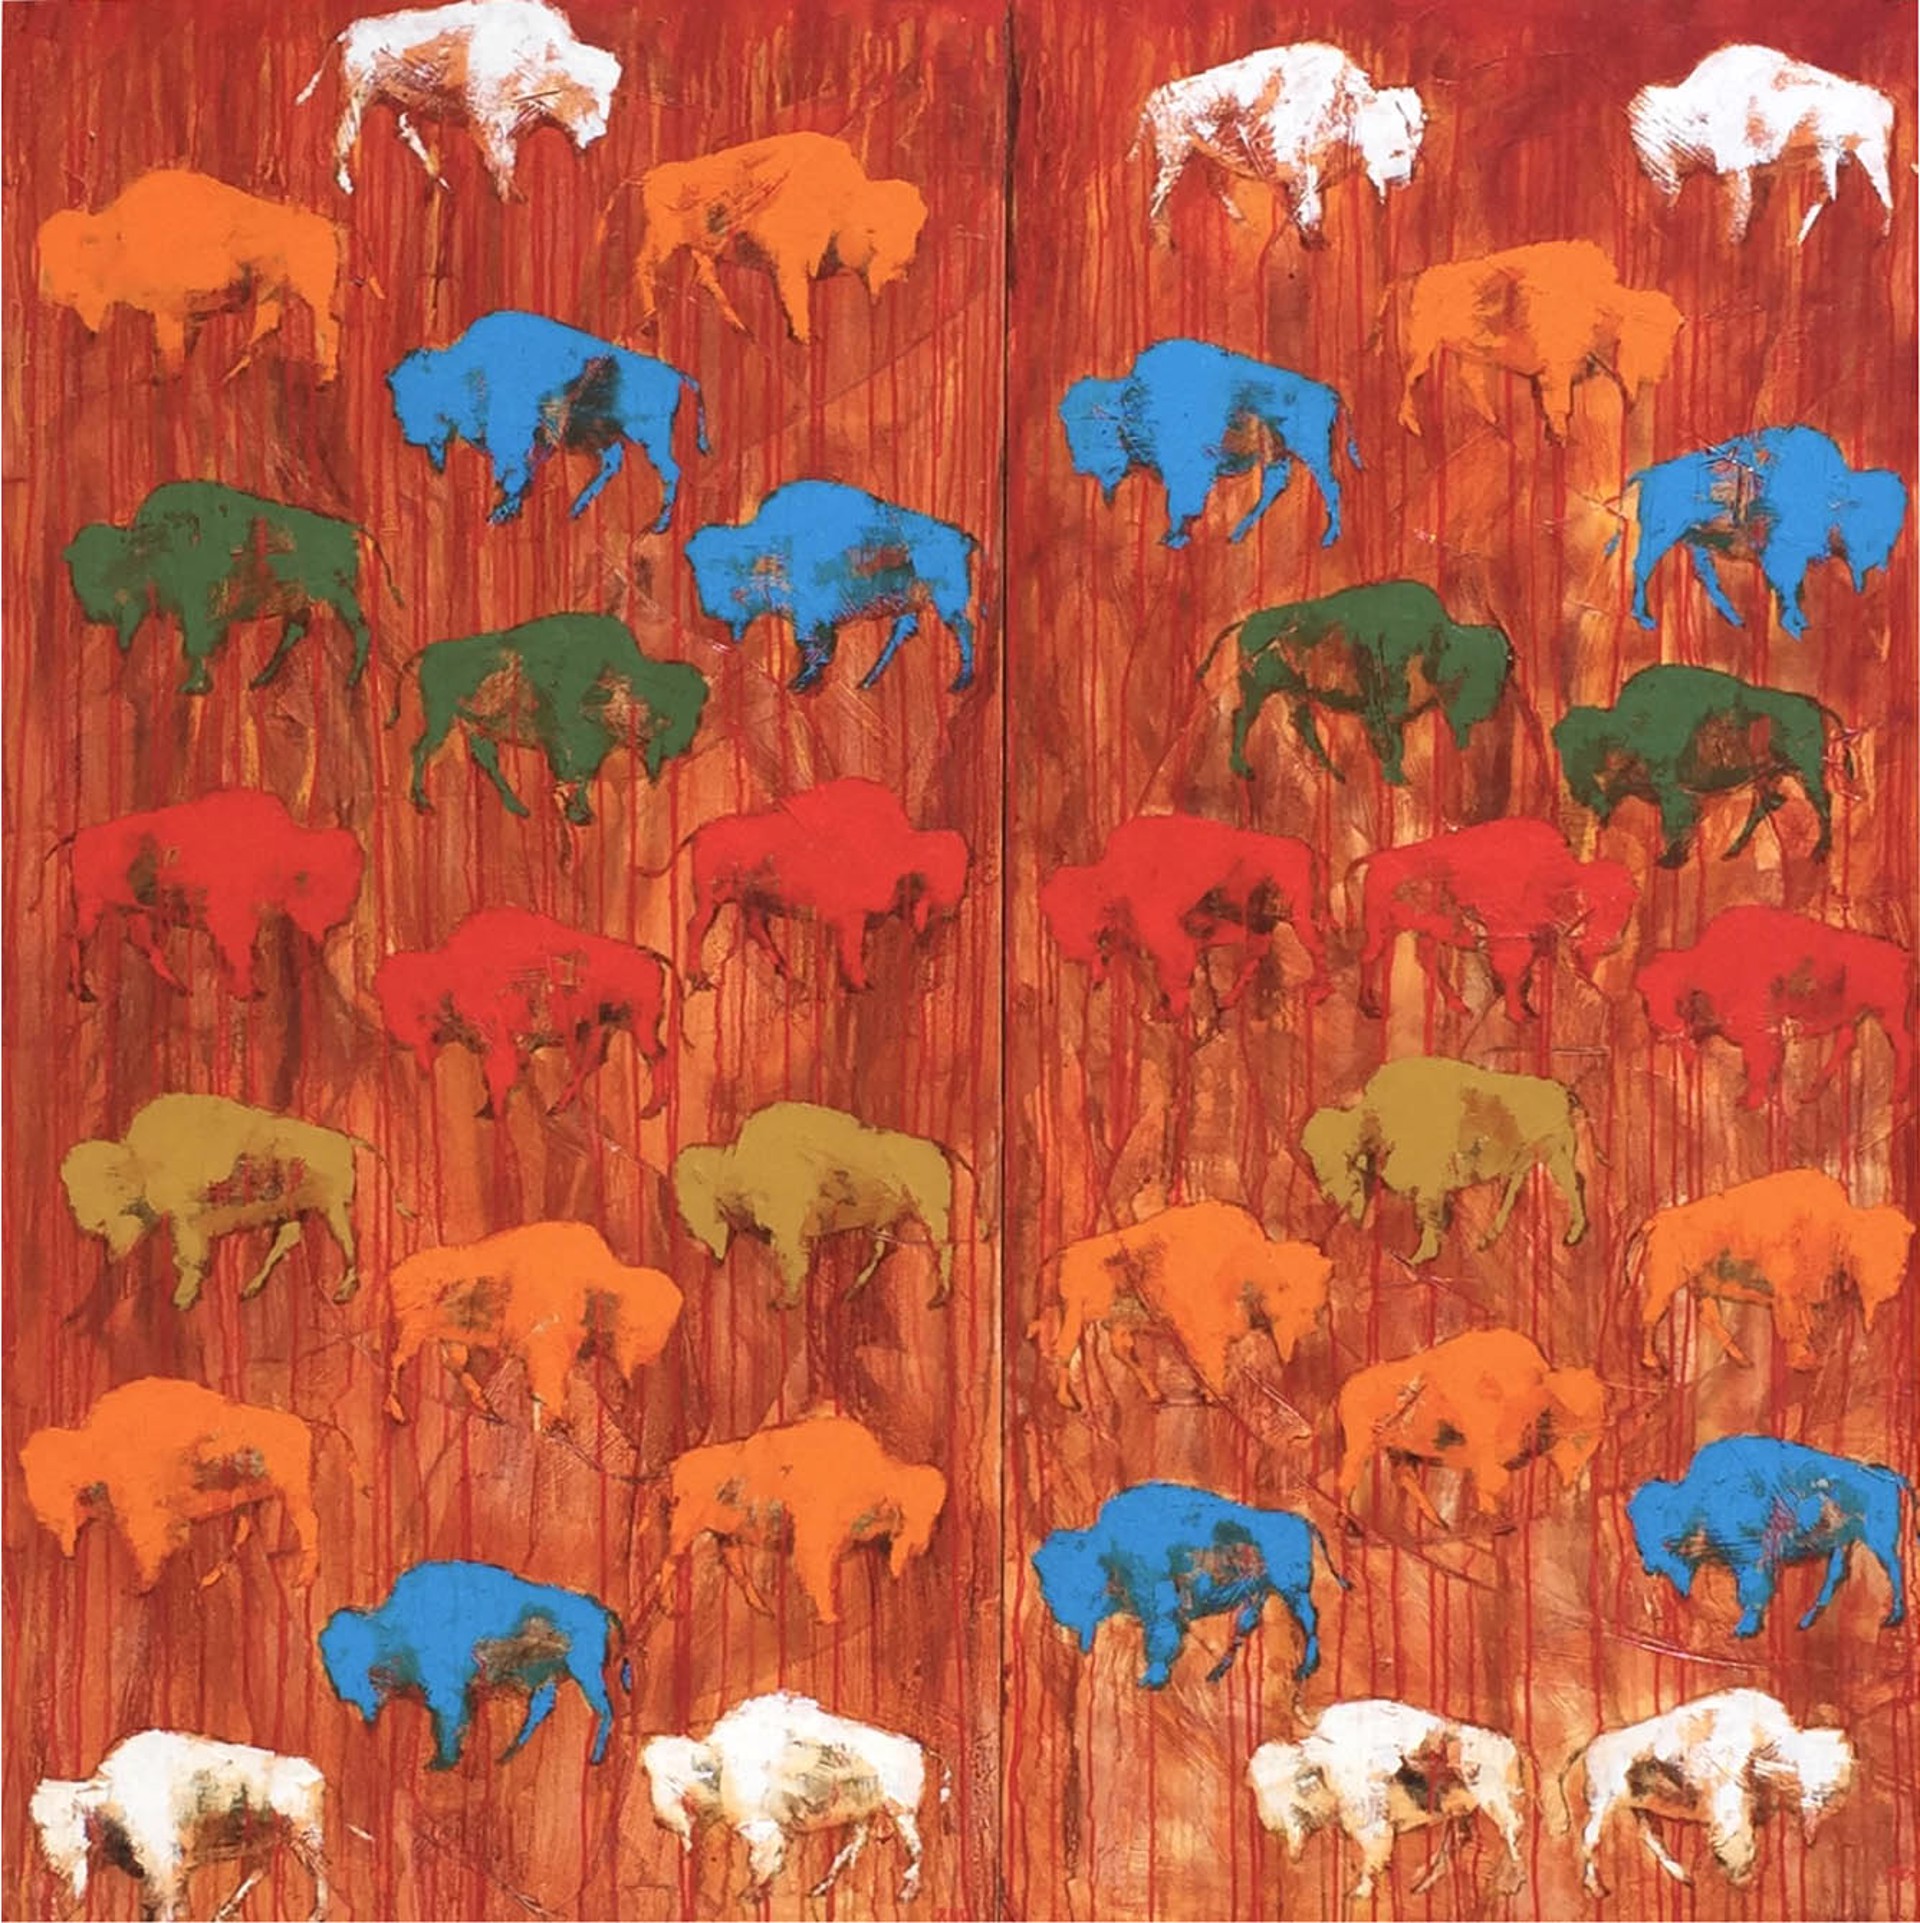 Original Oil Painting Featuring Colorful Bison Silhouettes Over Abstract Red Orange Background